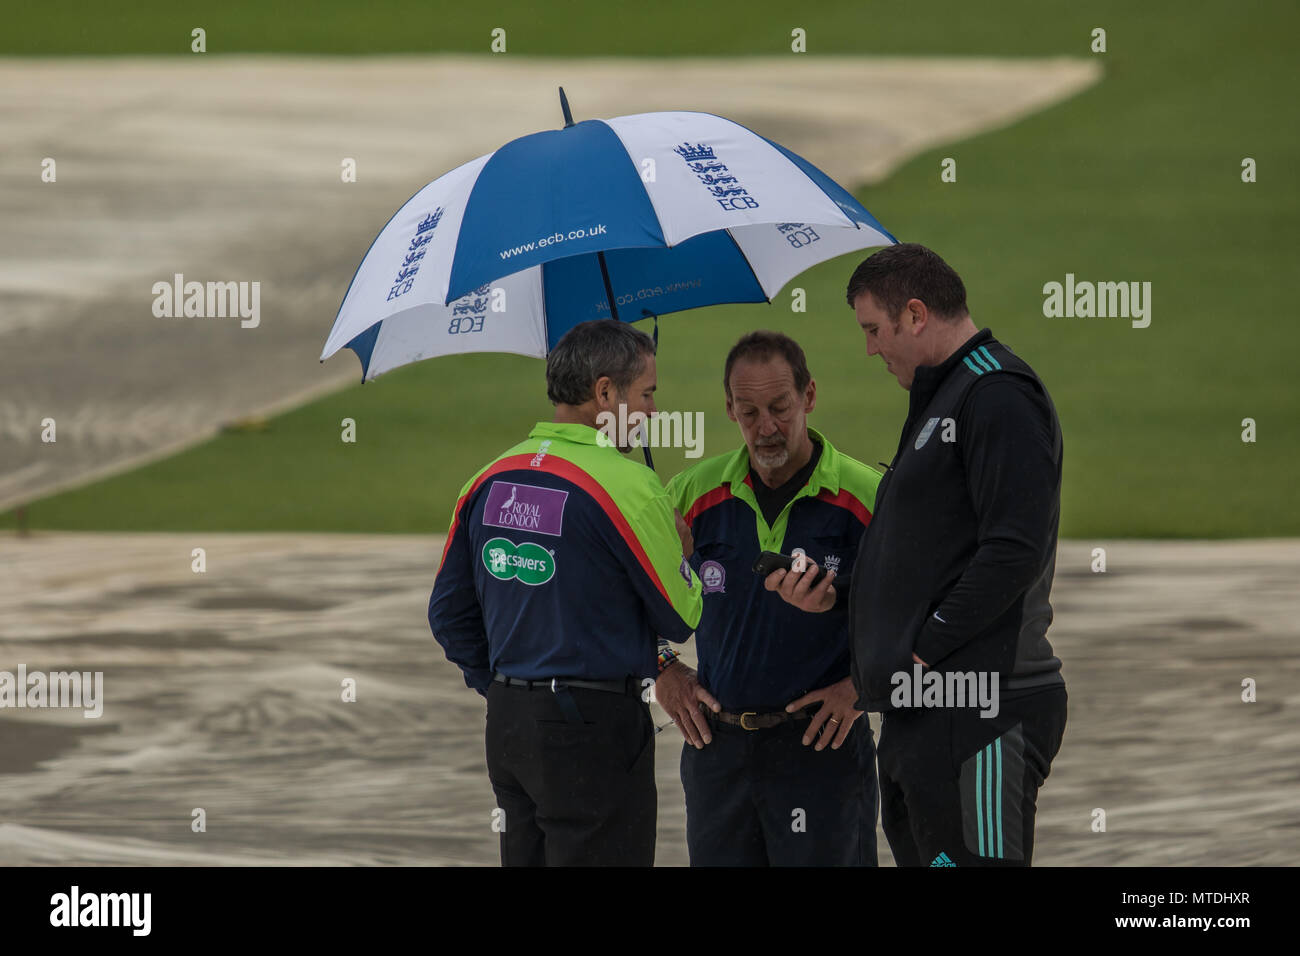 London,UK. 29 May, 2018. Surrey's Head Groundsman, Lee Fortis (right) checks his weather app and it doesn't look good during a pitch inspection  at the Oval with umpires Richard Illingworth (left) & Jeremy Lloyds (centre). The match between Surrey and Sussex in the Royal London One-Day Cup was abandoned without a ball being bowled due to heavy rain in London. David Rowe/Alamy Live News Stock Photo